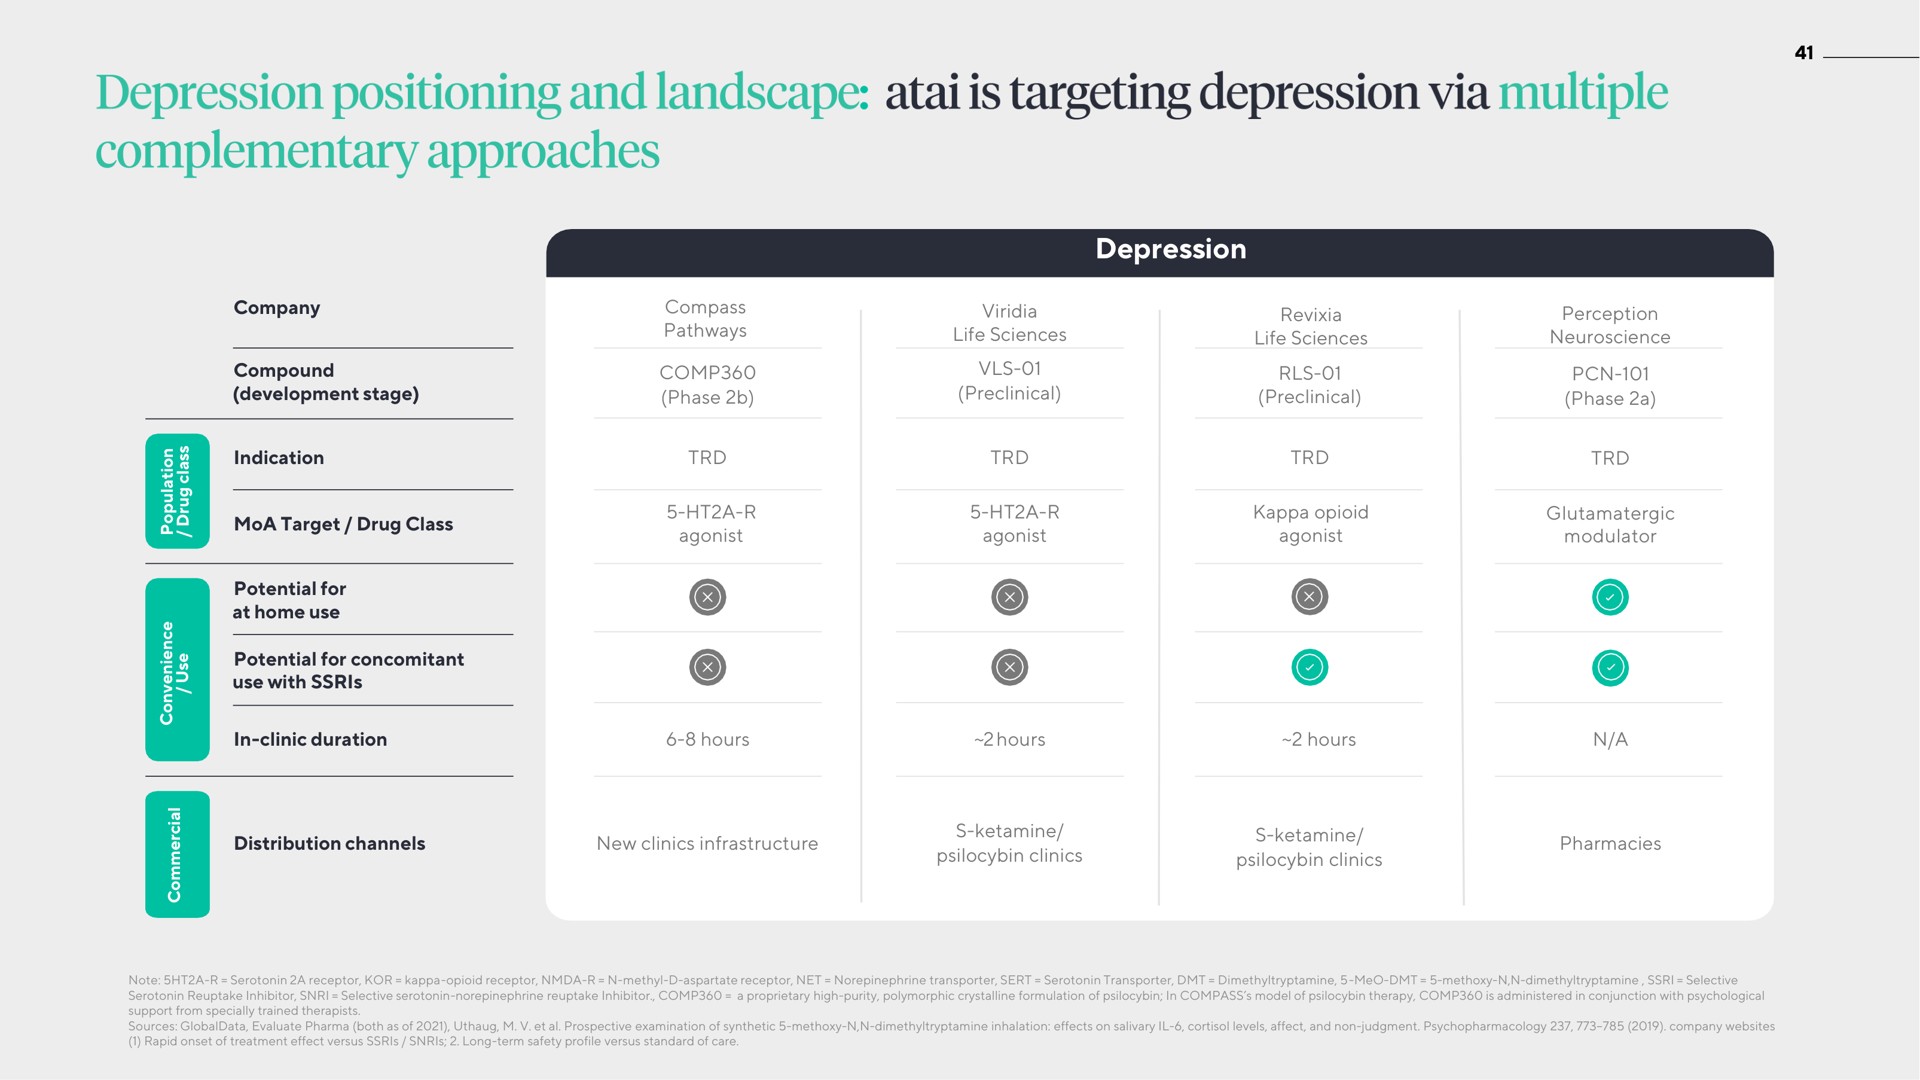 depression positioning and landscape is targeting via multiple complementary approaches | ATAI